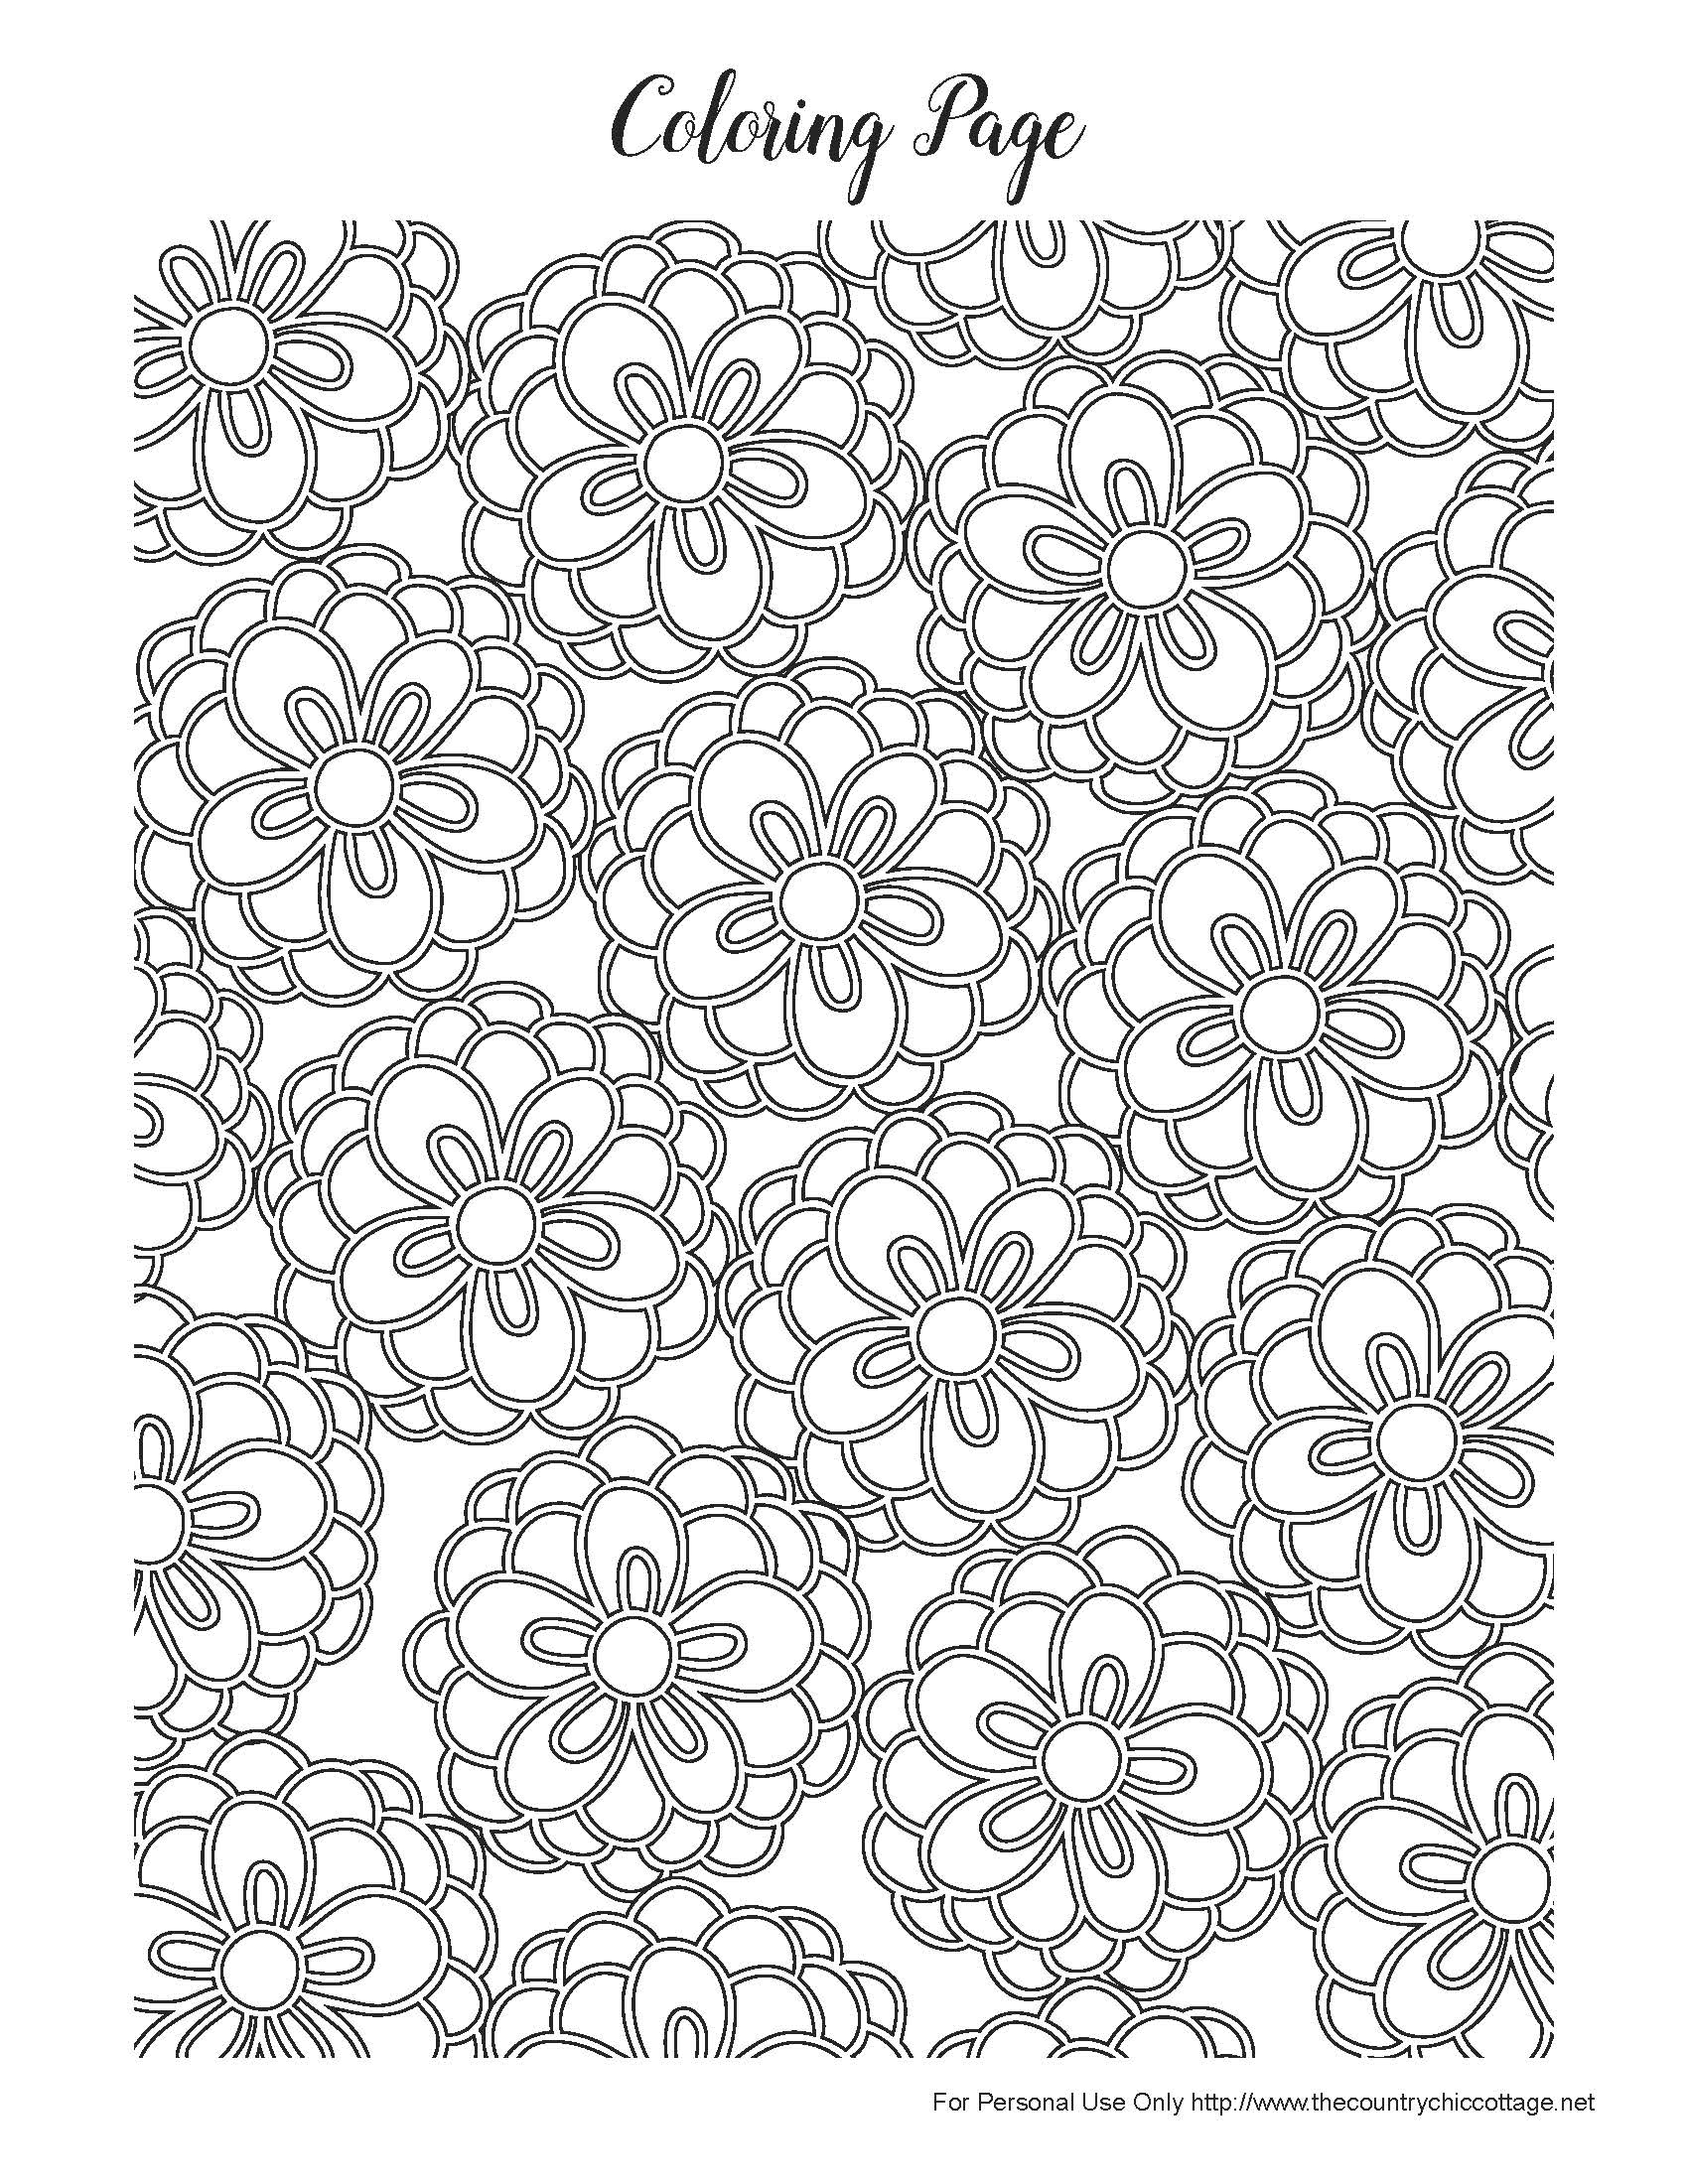 5300 Coloring Pages For Spring  Images